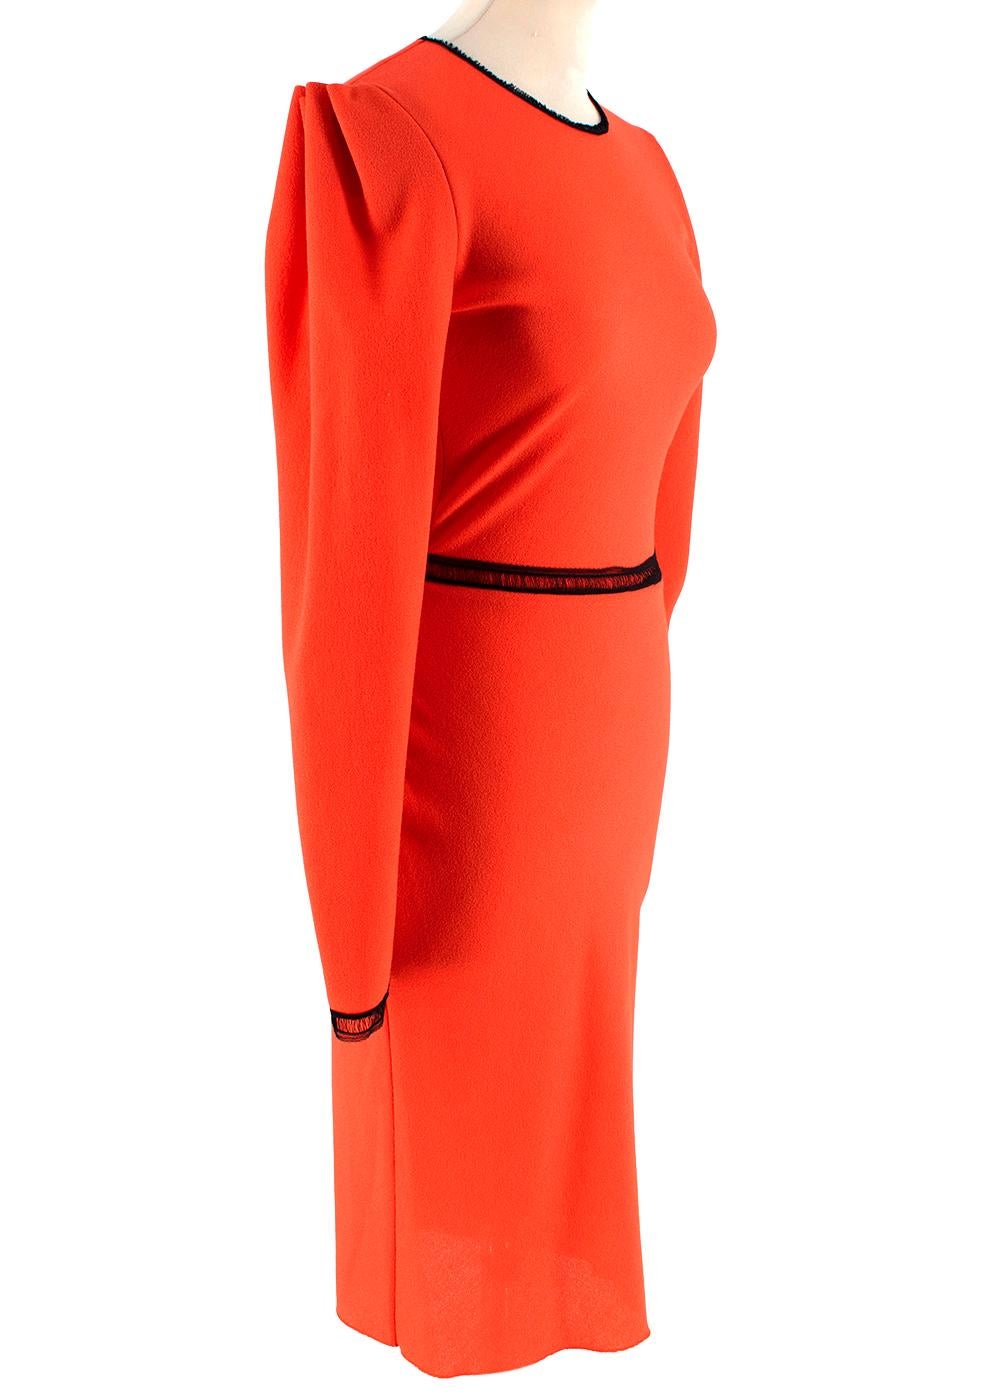 Roksanda Ilincic Orange Wool Long Sleeve Mini Dress

-Luxurious soft wool crepe fabric
-Gorgeous pleated detail to the sleeves 
-Round neckline 
-2-way full length zip fastening to the back 
-Button fastening to the cuff 
-Black lace details to the